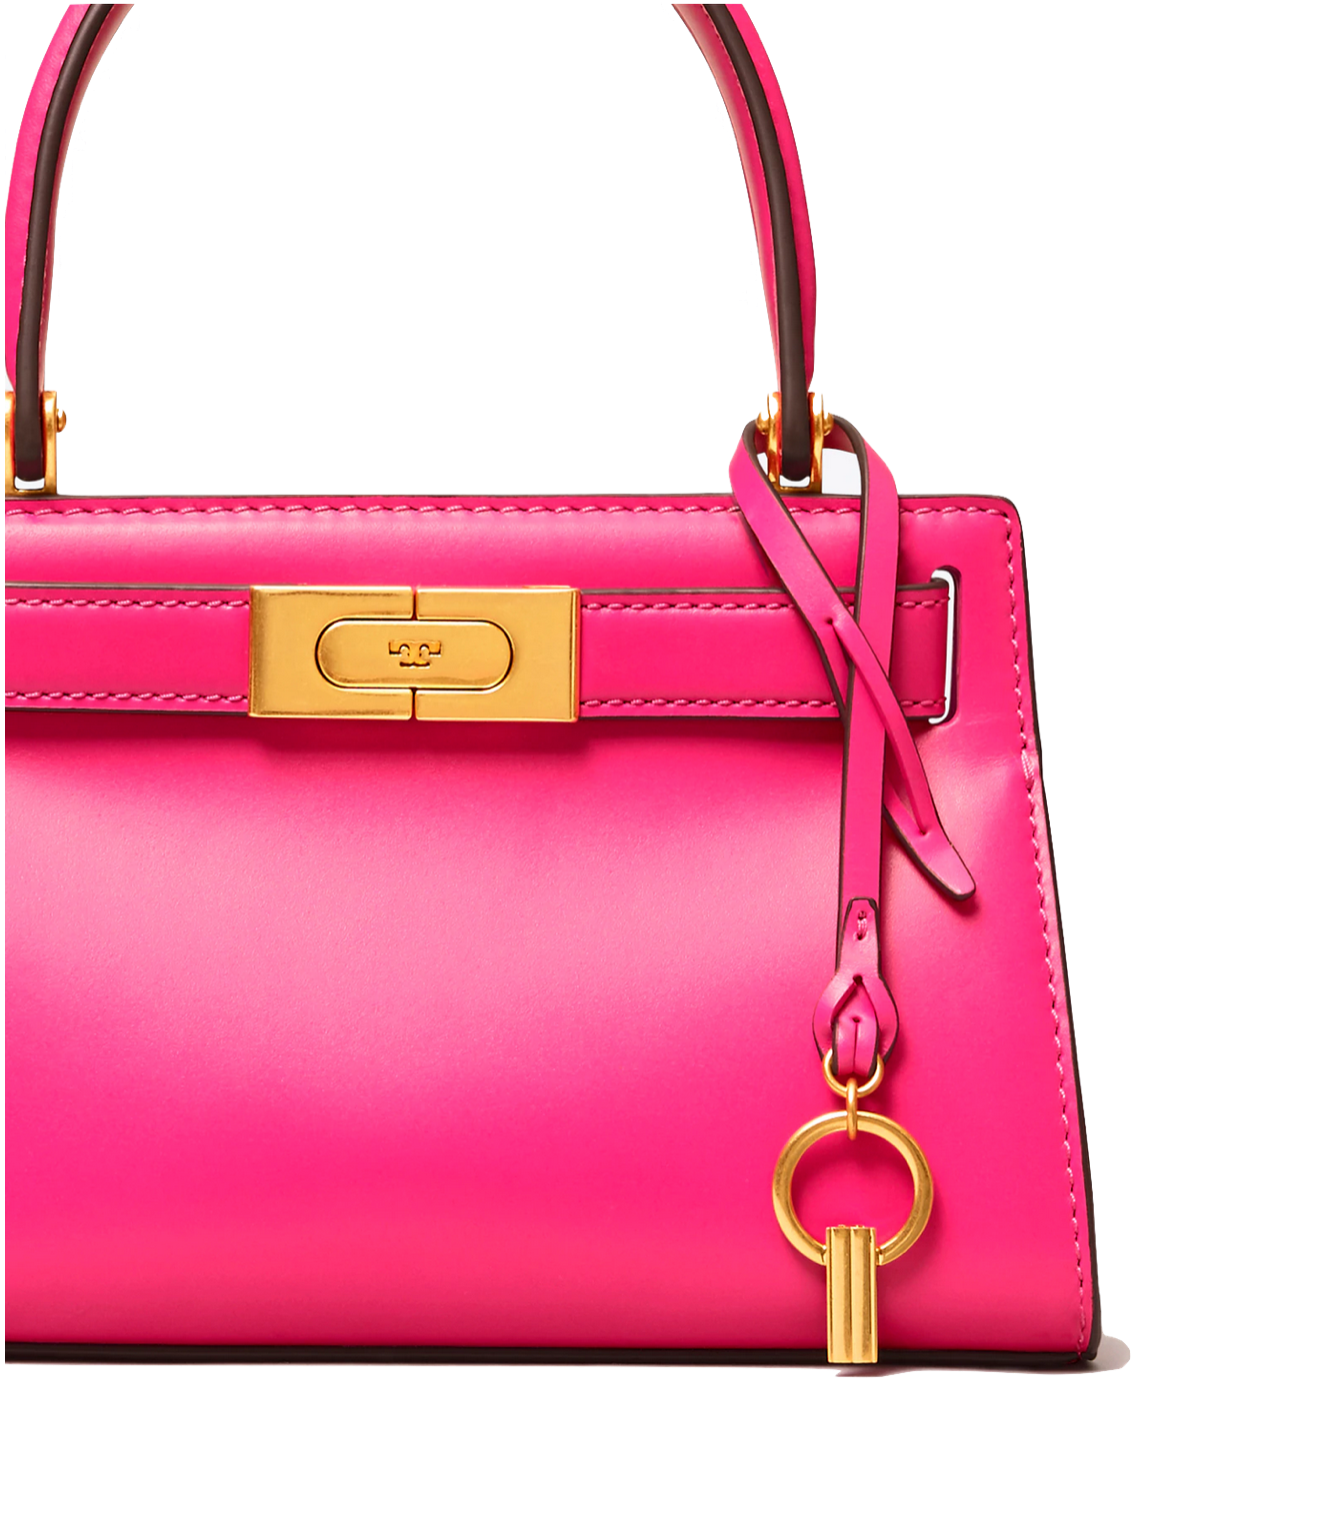 Crazy Pink Lee Radziwill Petite Bag by Tory Burch Accessories for $50